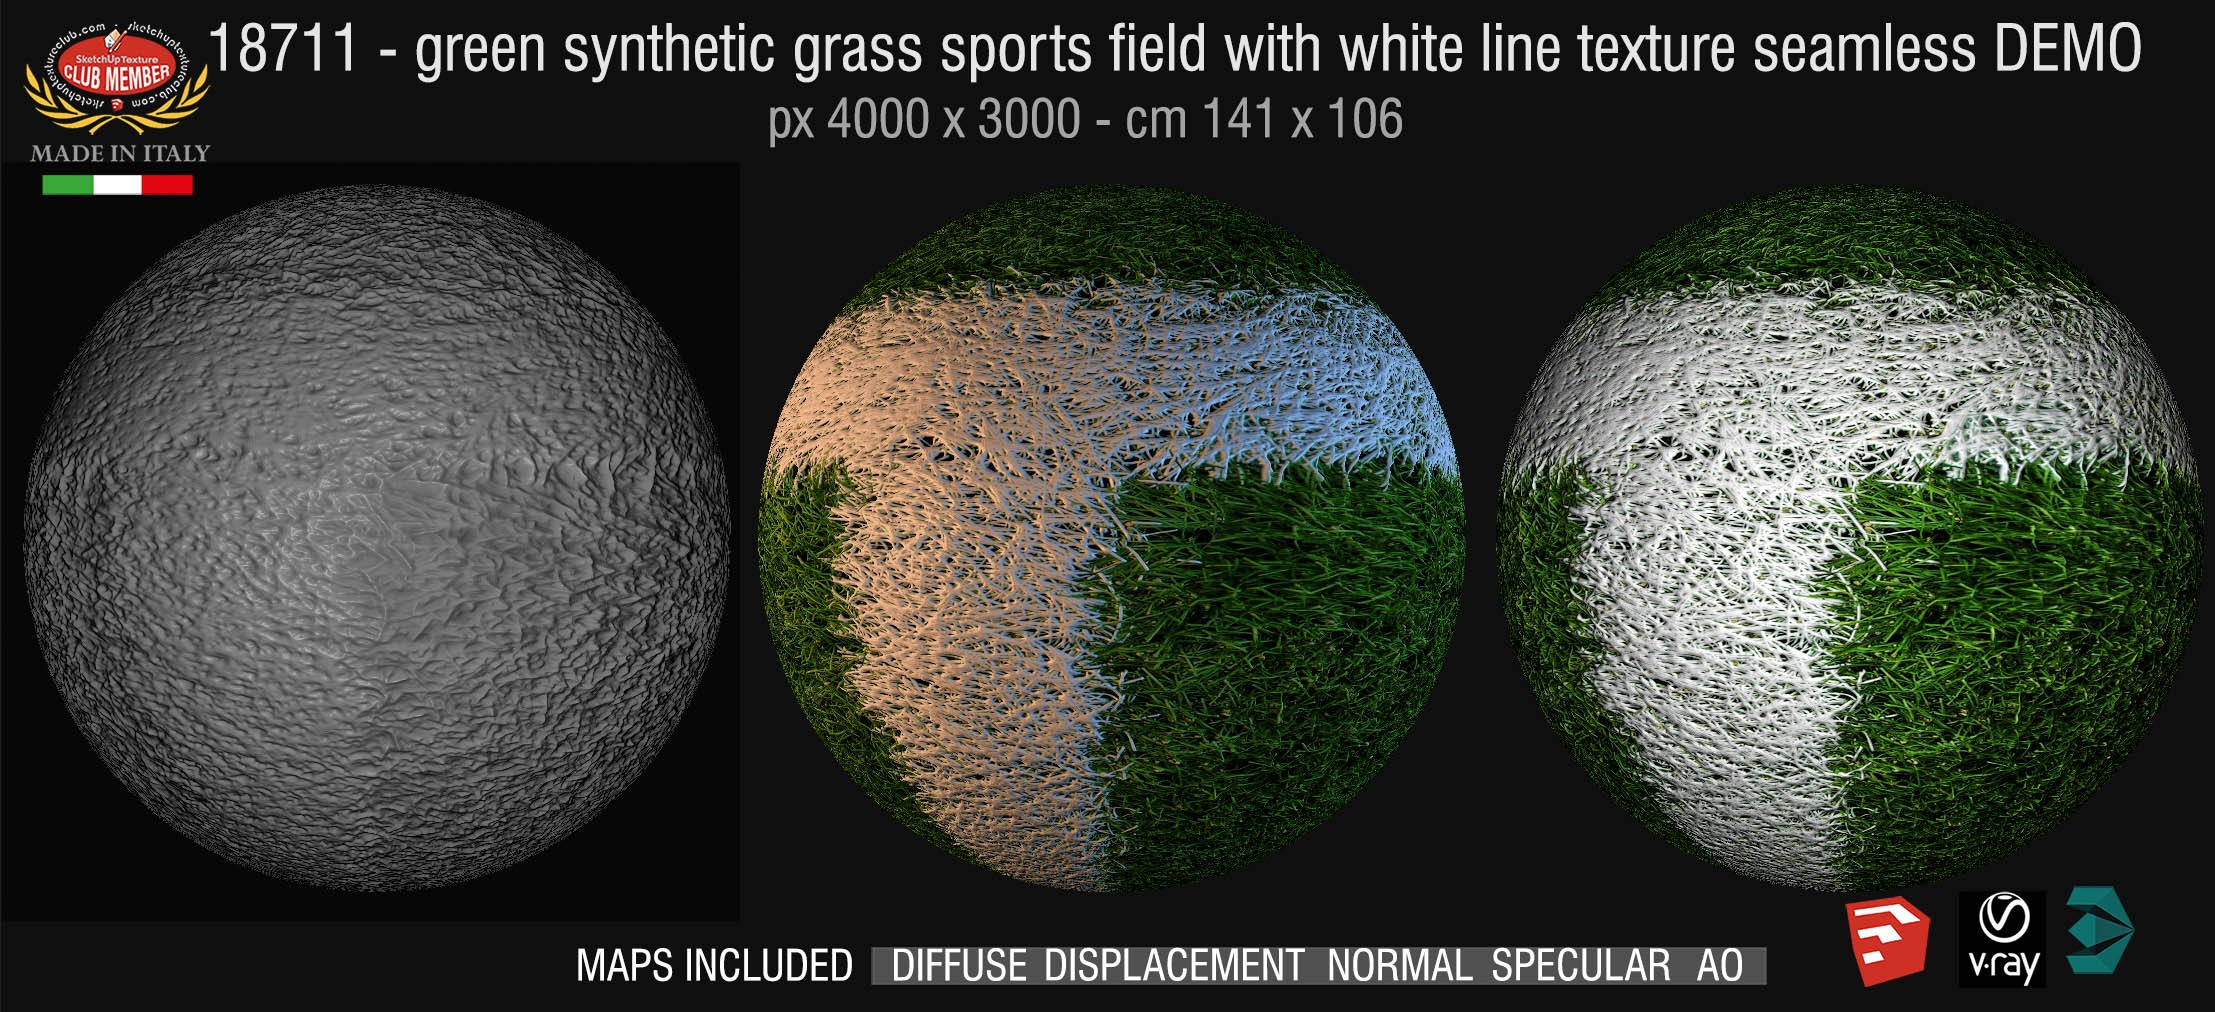 18711 HR Green synthetic grass sports field with white line texture + maps DEMO